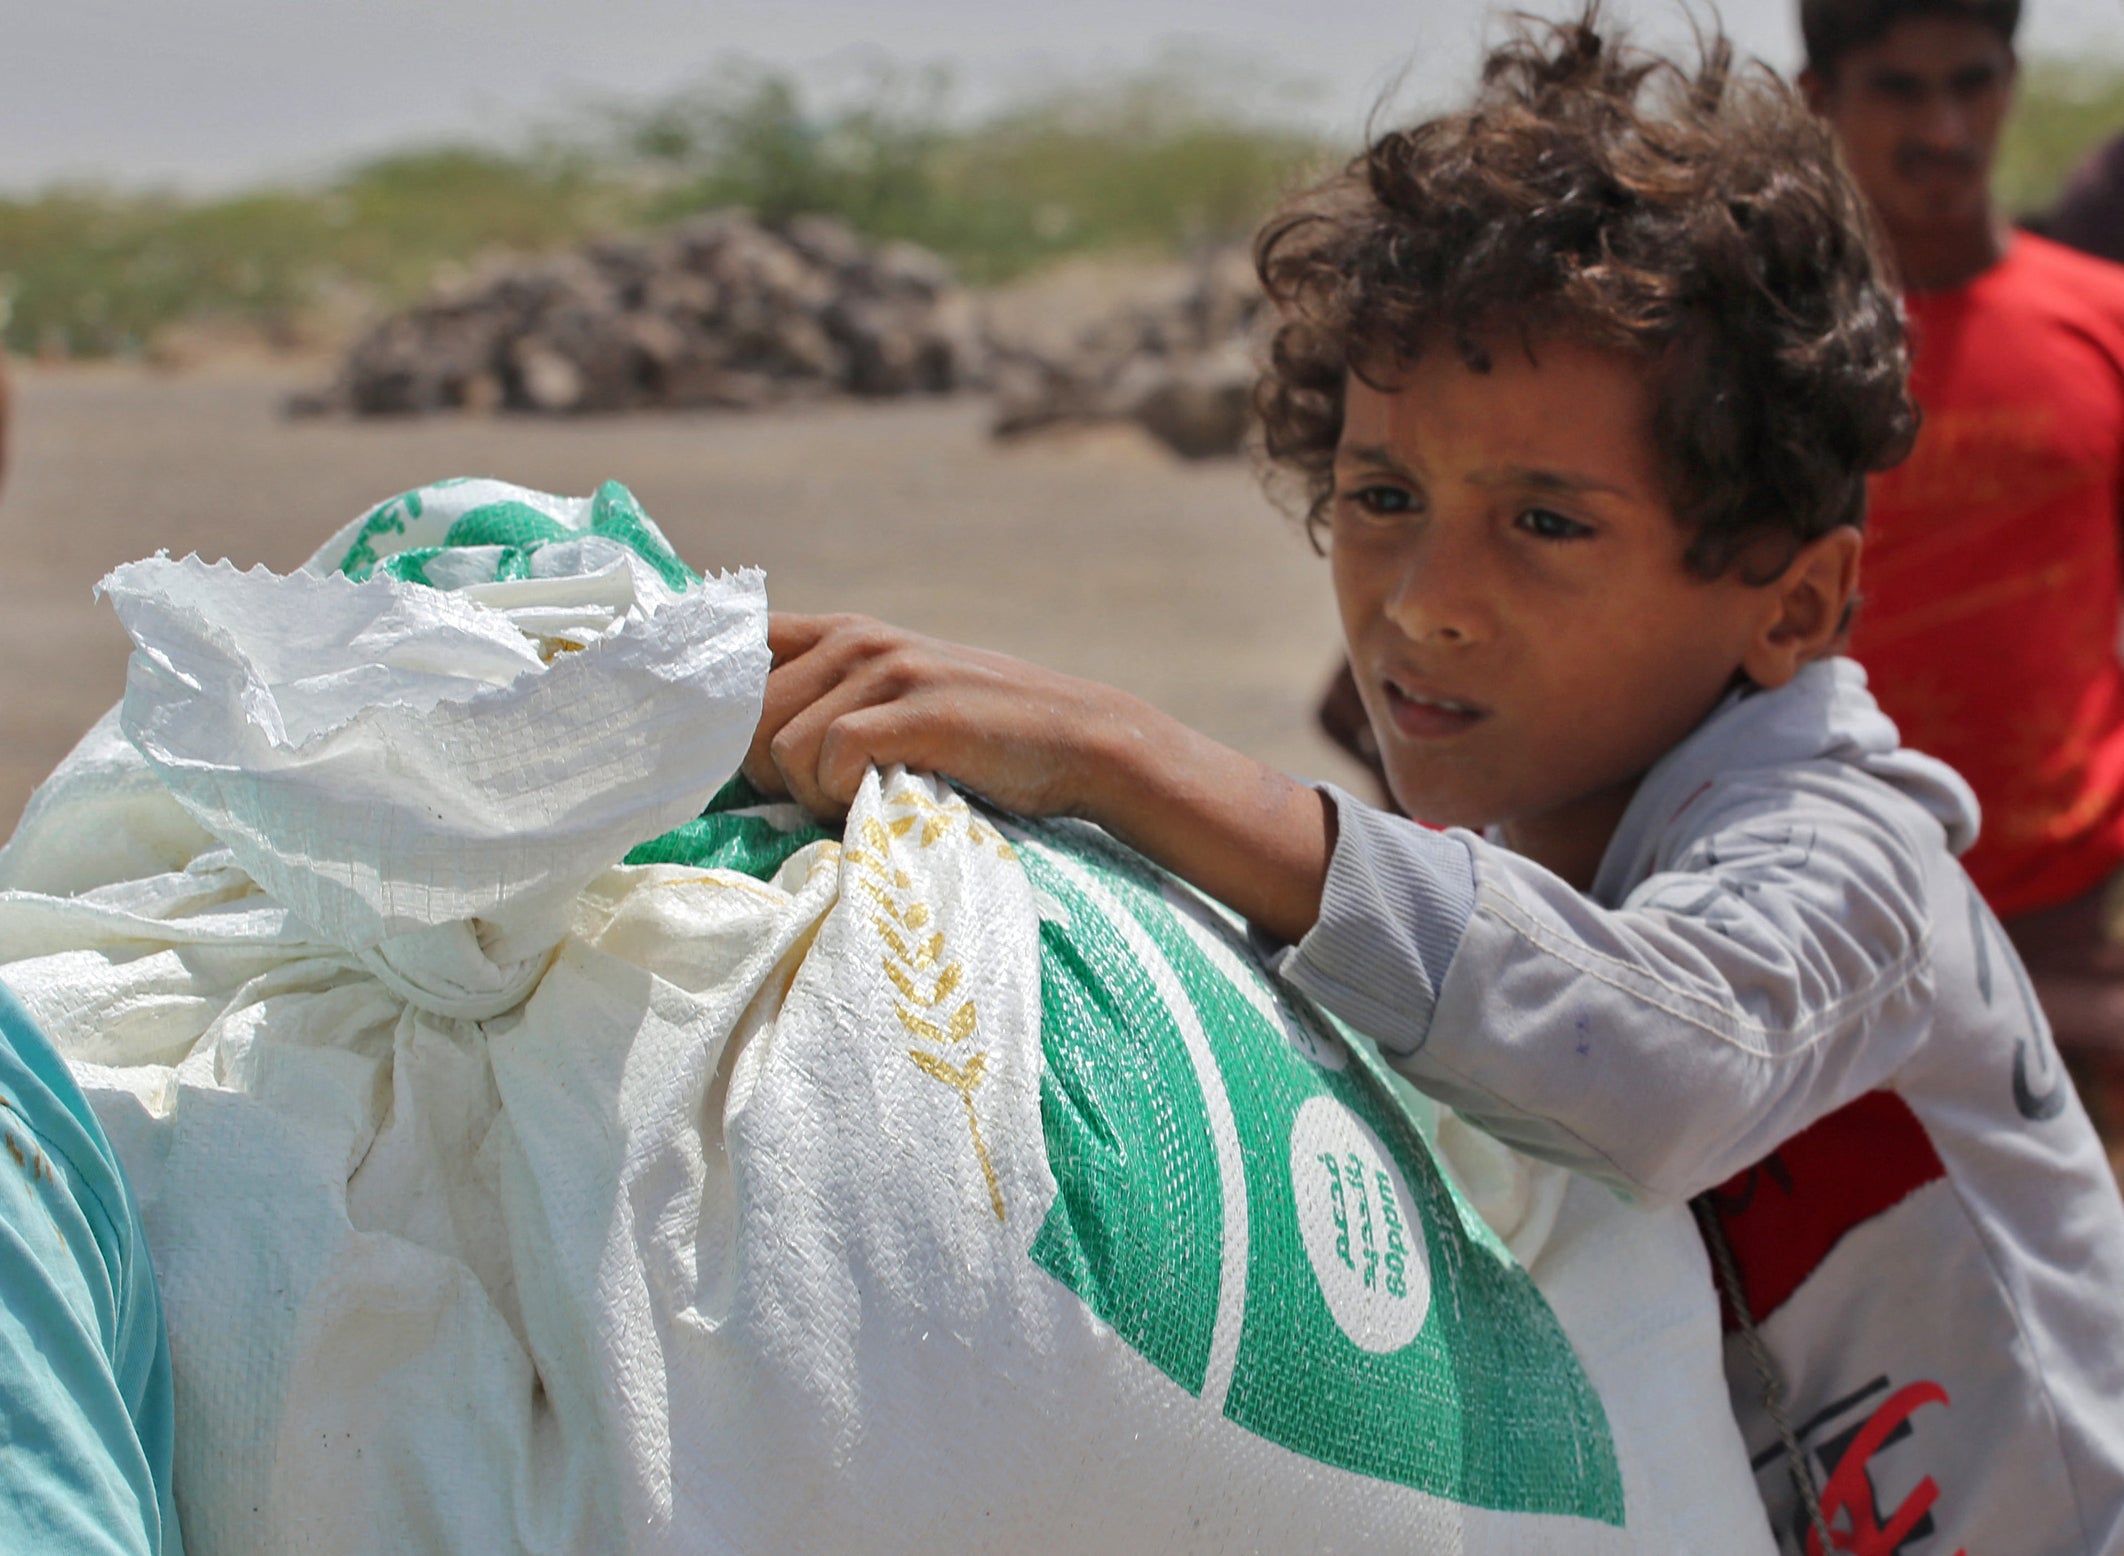 The UN provides food assistance to 13 million people per month in Yemen but rations have been halved